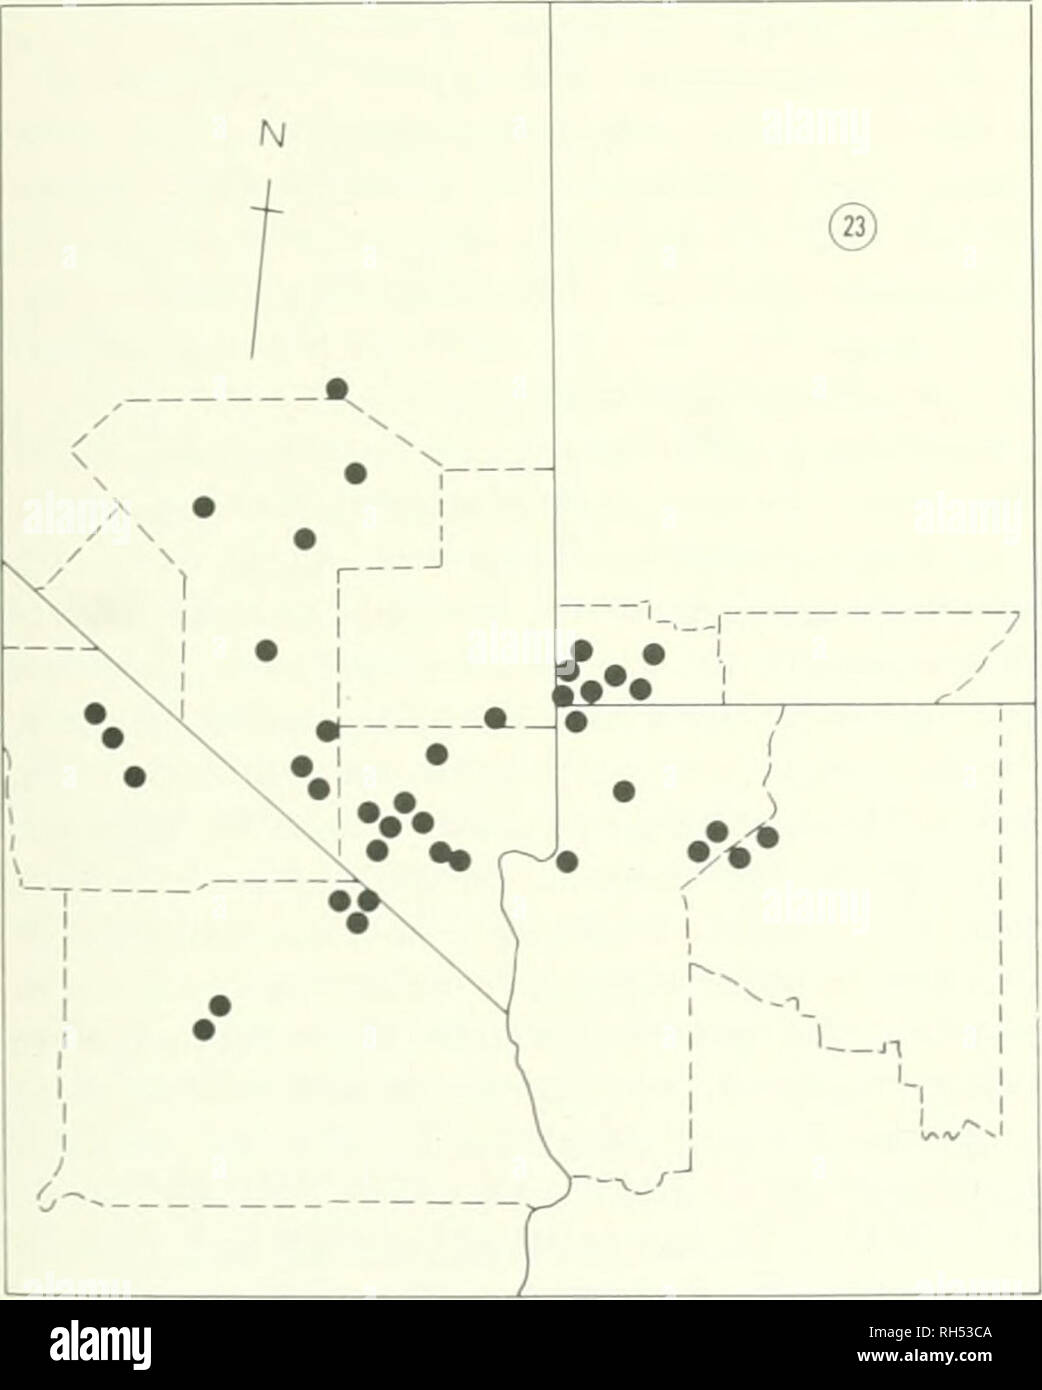 . Brigham Young University science bulletin. Biology -- Periodicals. Map. No. 22. Southern Nevada. Range of C insolila (Macbr.) Payson.. Map No. 23. Soulliern Nevada and parts of adjoining state Range of C virgineiisis (M. I',. Jones) Payson. Oreocarva hoffmannii (.lohnst.) .Abranis. Abrams. III. II. Pae.St. 3:600. 1951. Plants bientiial. 1.7-3.4 dm tall; stems l-several, 0.2-1.6 dm long, conspicuously hirsute; leaves spatu- late. crowded at the base, reduced upward. 2-5 cm long. 0.5-1.2 cm wide, spreading setose-hirsute, pustu- late on both leaf surfaces, but more conspicuous dorsally; inflor Stock Photo